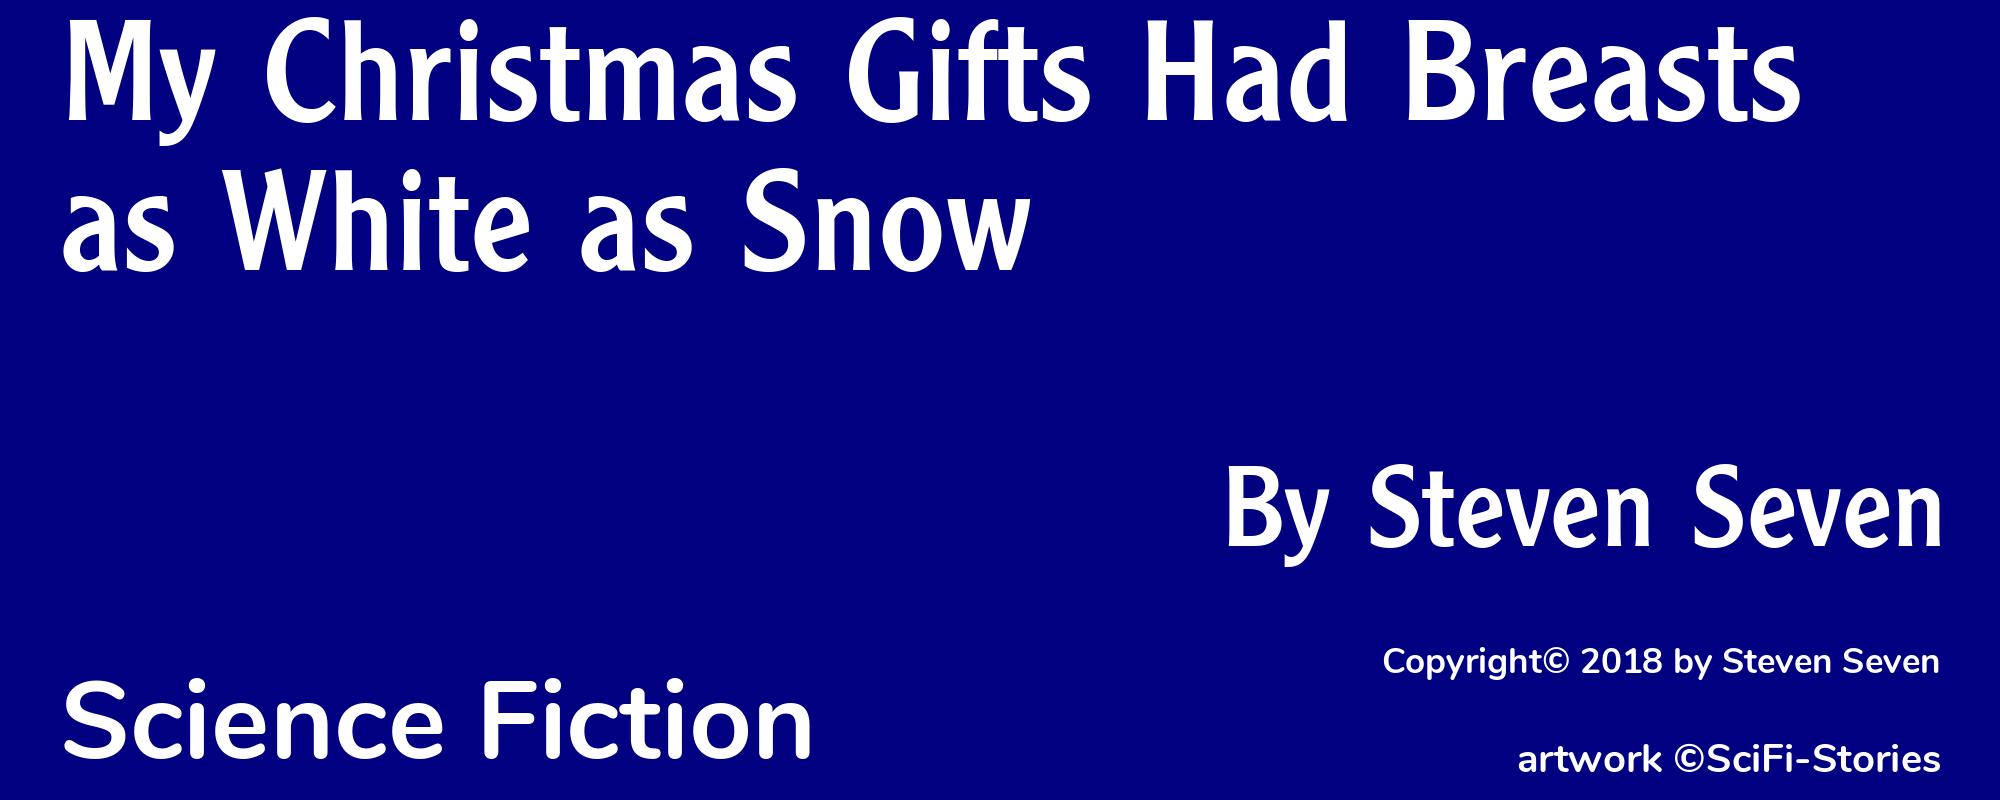 My Christmas Gifts Had Breasts as White as Snow - Cover